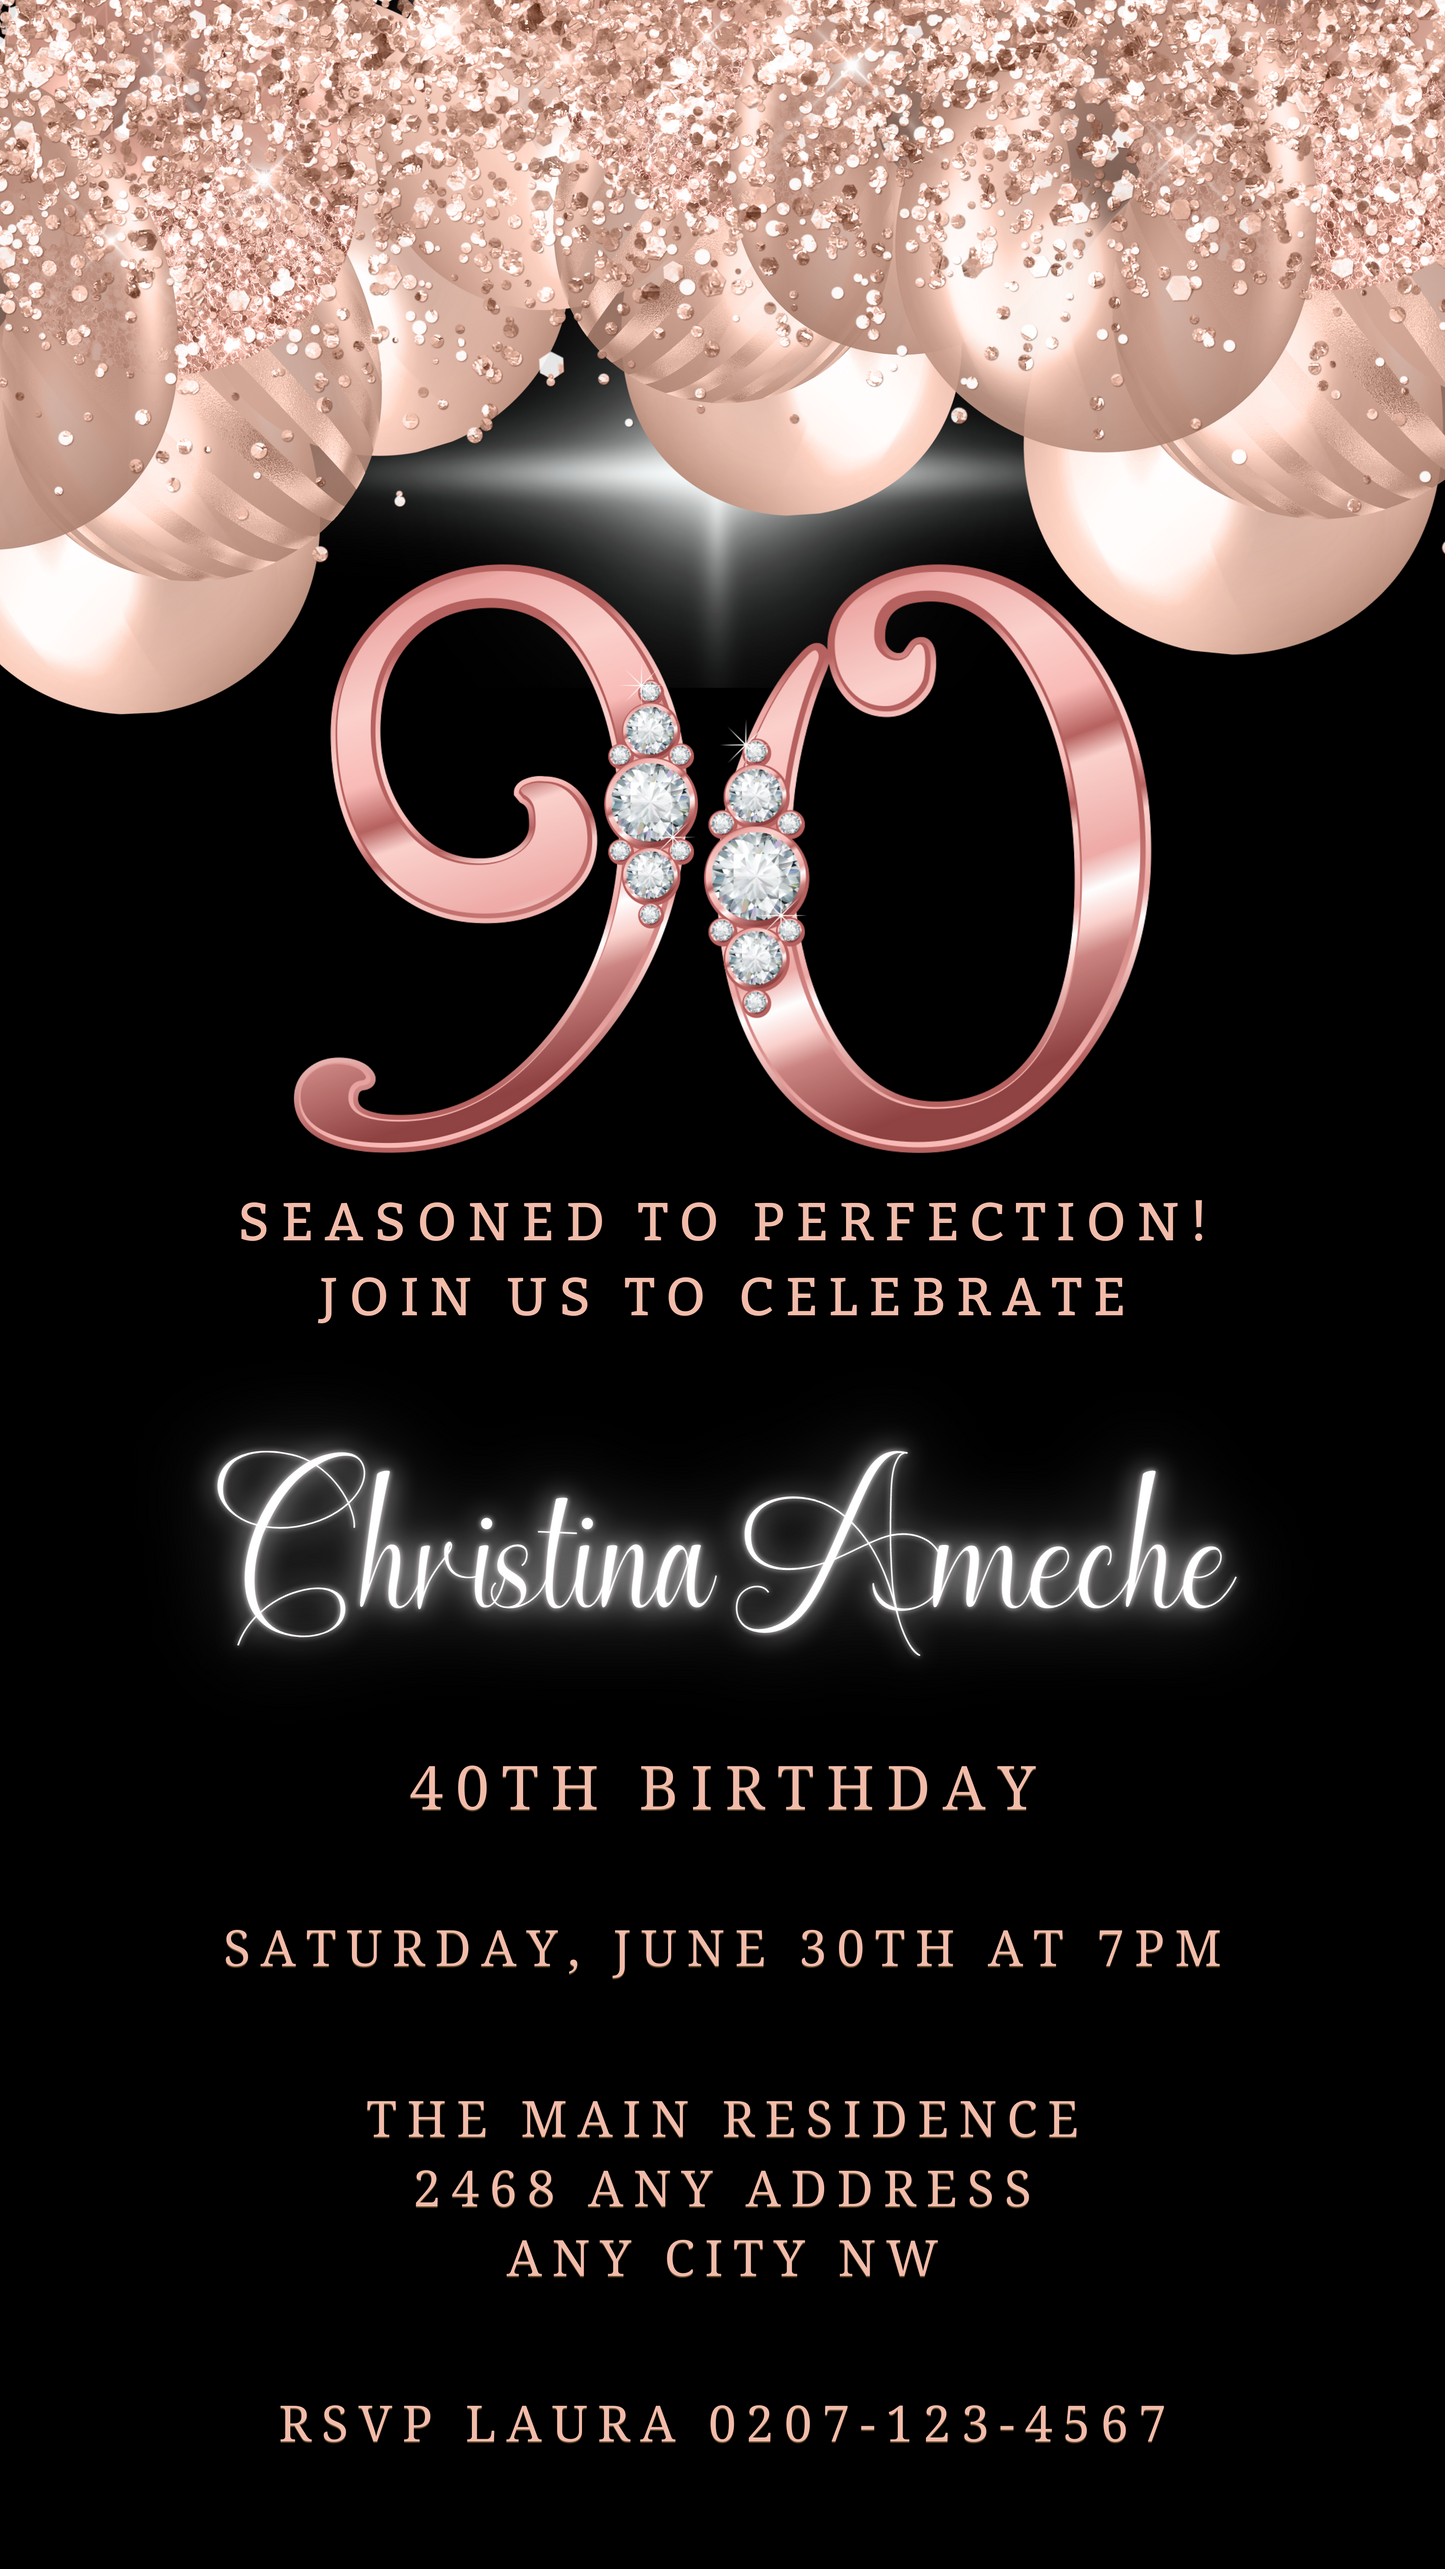 Rose Gold Balloons Diamond Studs | 90th Birthday Evite: customizable digital invitation with elegant black and gold design, pearls, diamonds, and editable text for easy personalization.